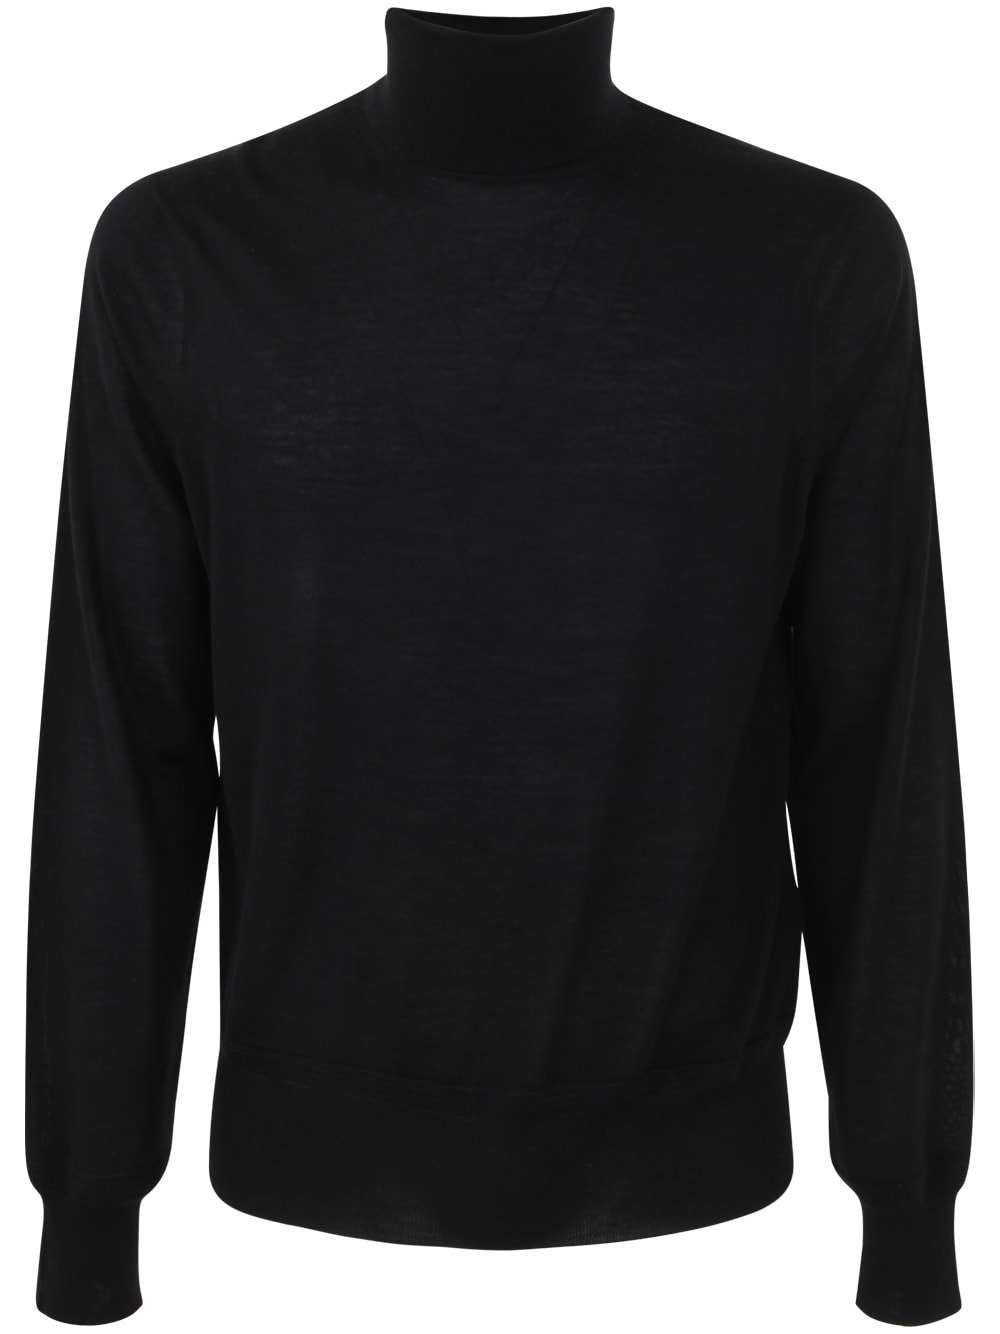 TOM FORD TURTLE NECK SWEATER